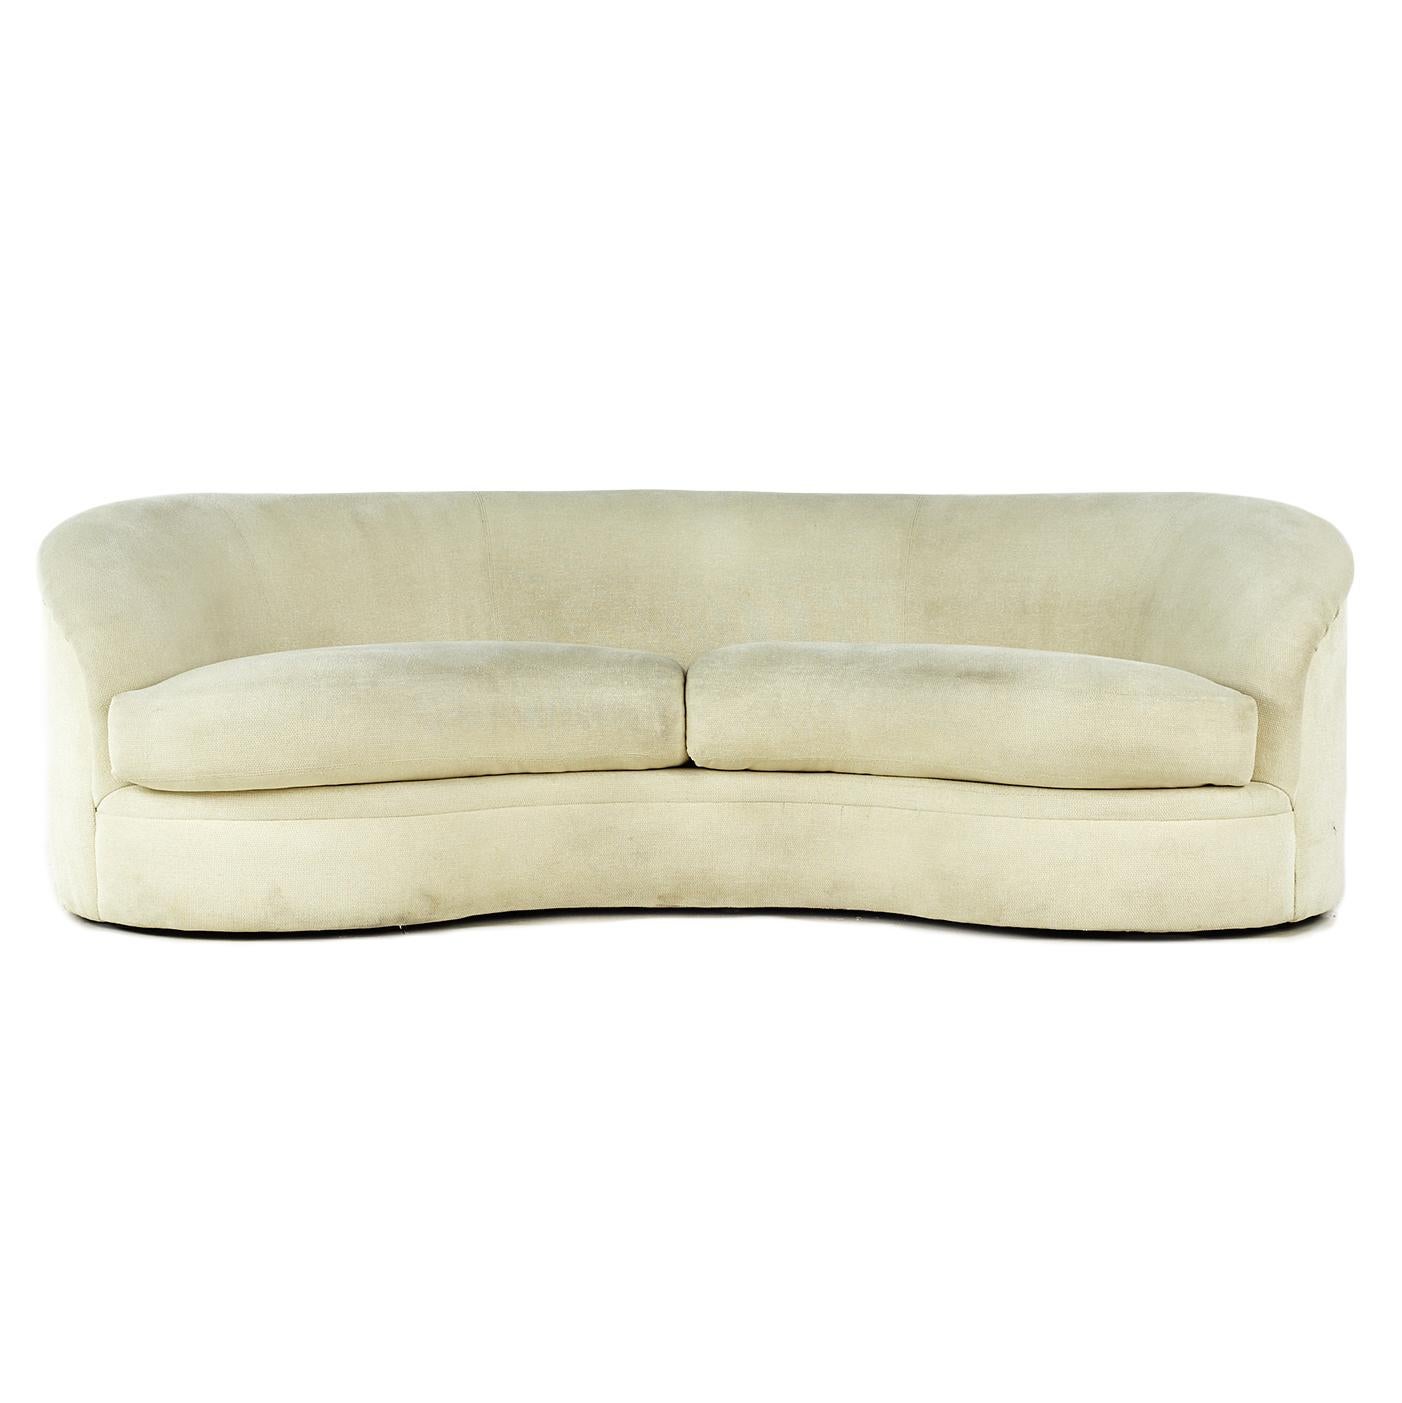 Vladimir Kagan Style Directional Furniture midcentury Biomorphic kidney sofa

This sofa measures: 85 wide x 47 deep x 28 inches high, with a seat height of 18 inches

All pieces of furniture can be had in what we call restored vintage condition.